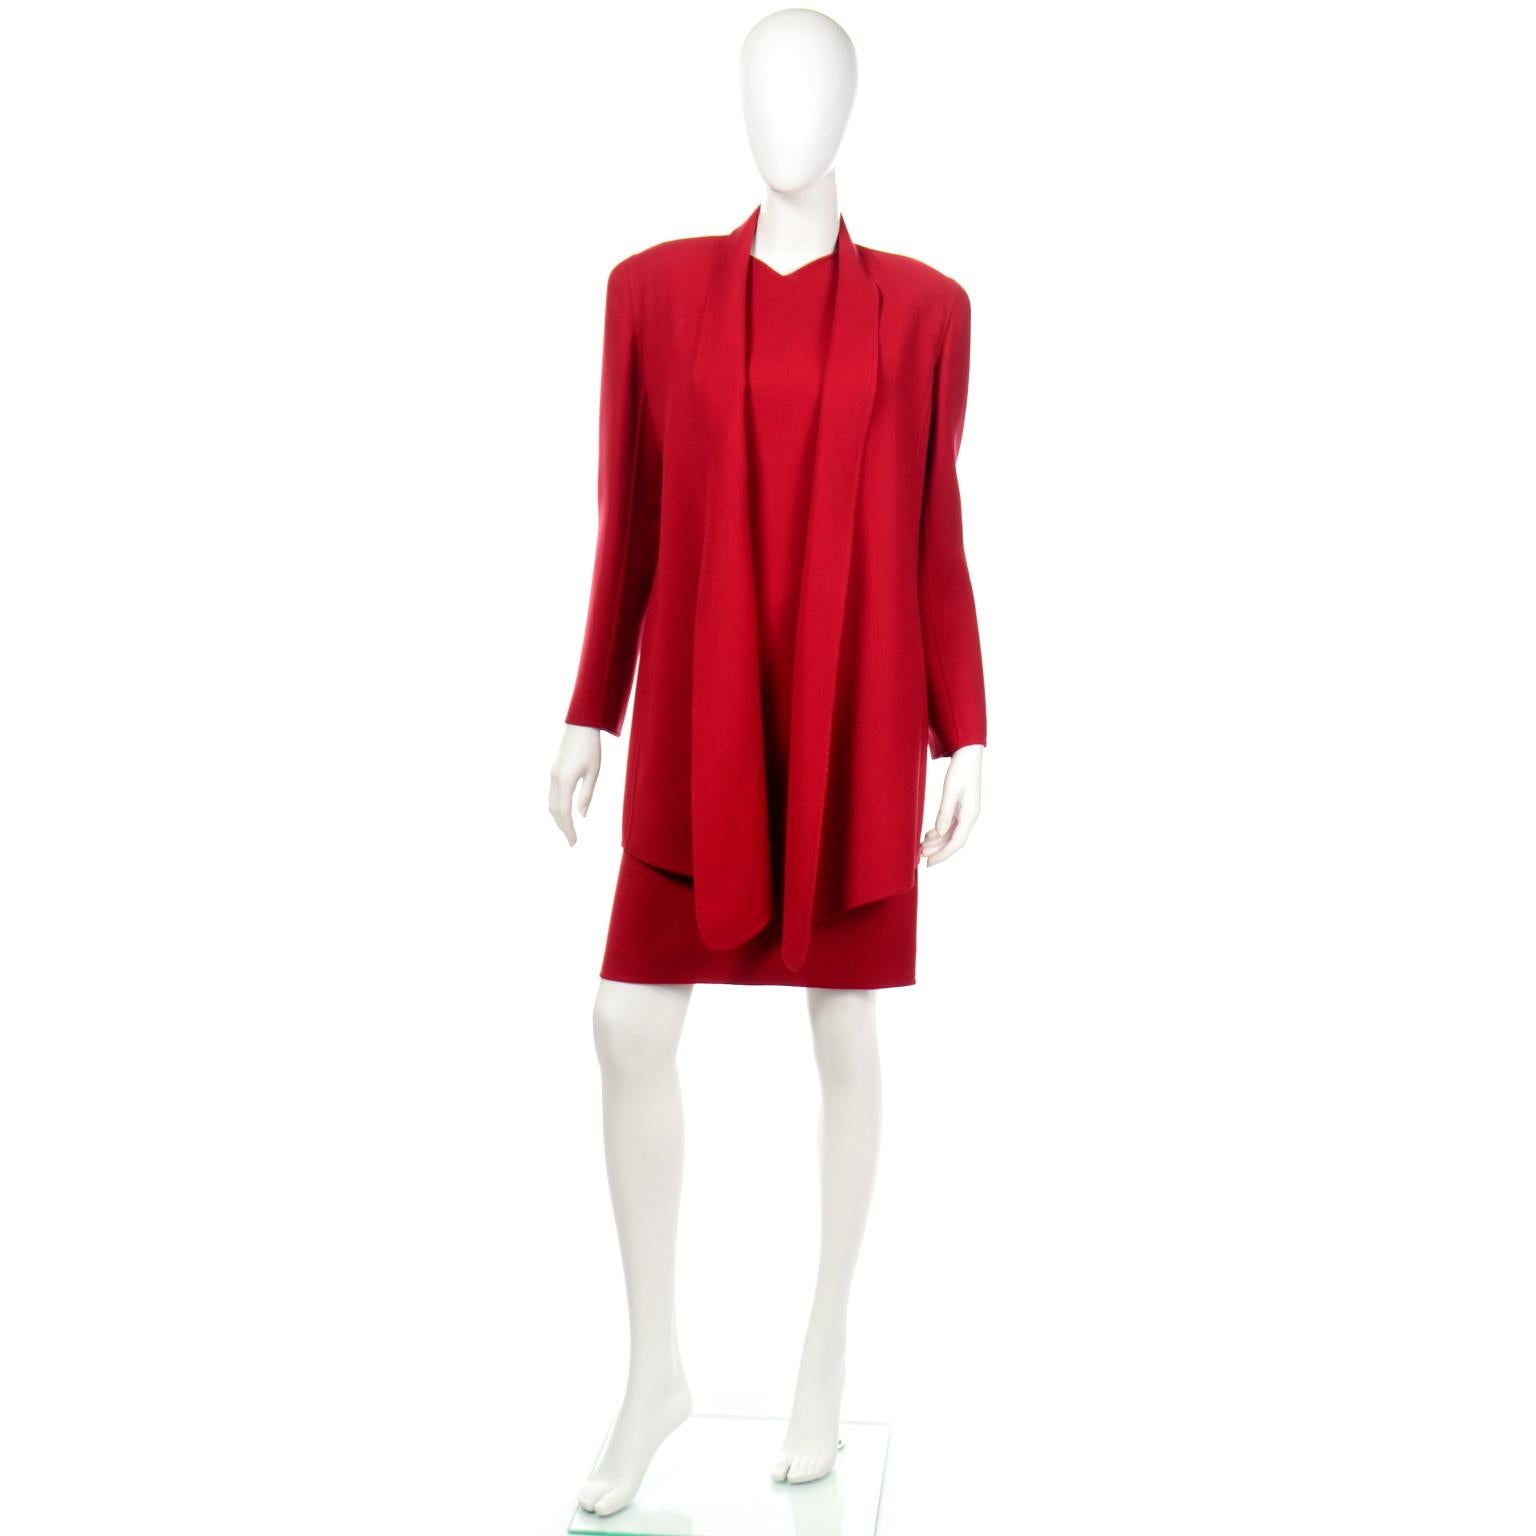 This is a 2 piece vintage Oscar de la Renta dress and jacket suit in a rich red wool blend fabric. This beautiful 2 piece ensemble includes a very flattering sleeveless dress with waist accentuating top stitched seams. The dress closes with a center